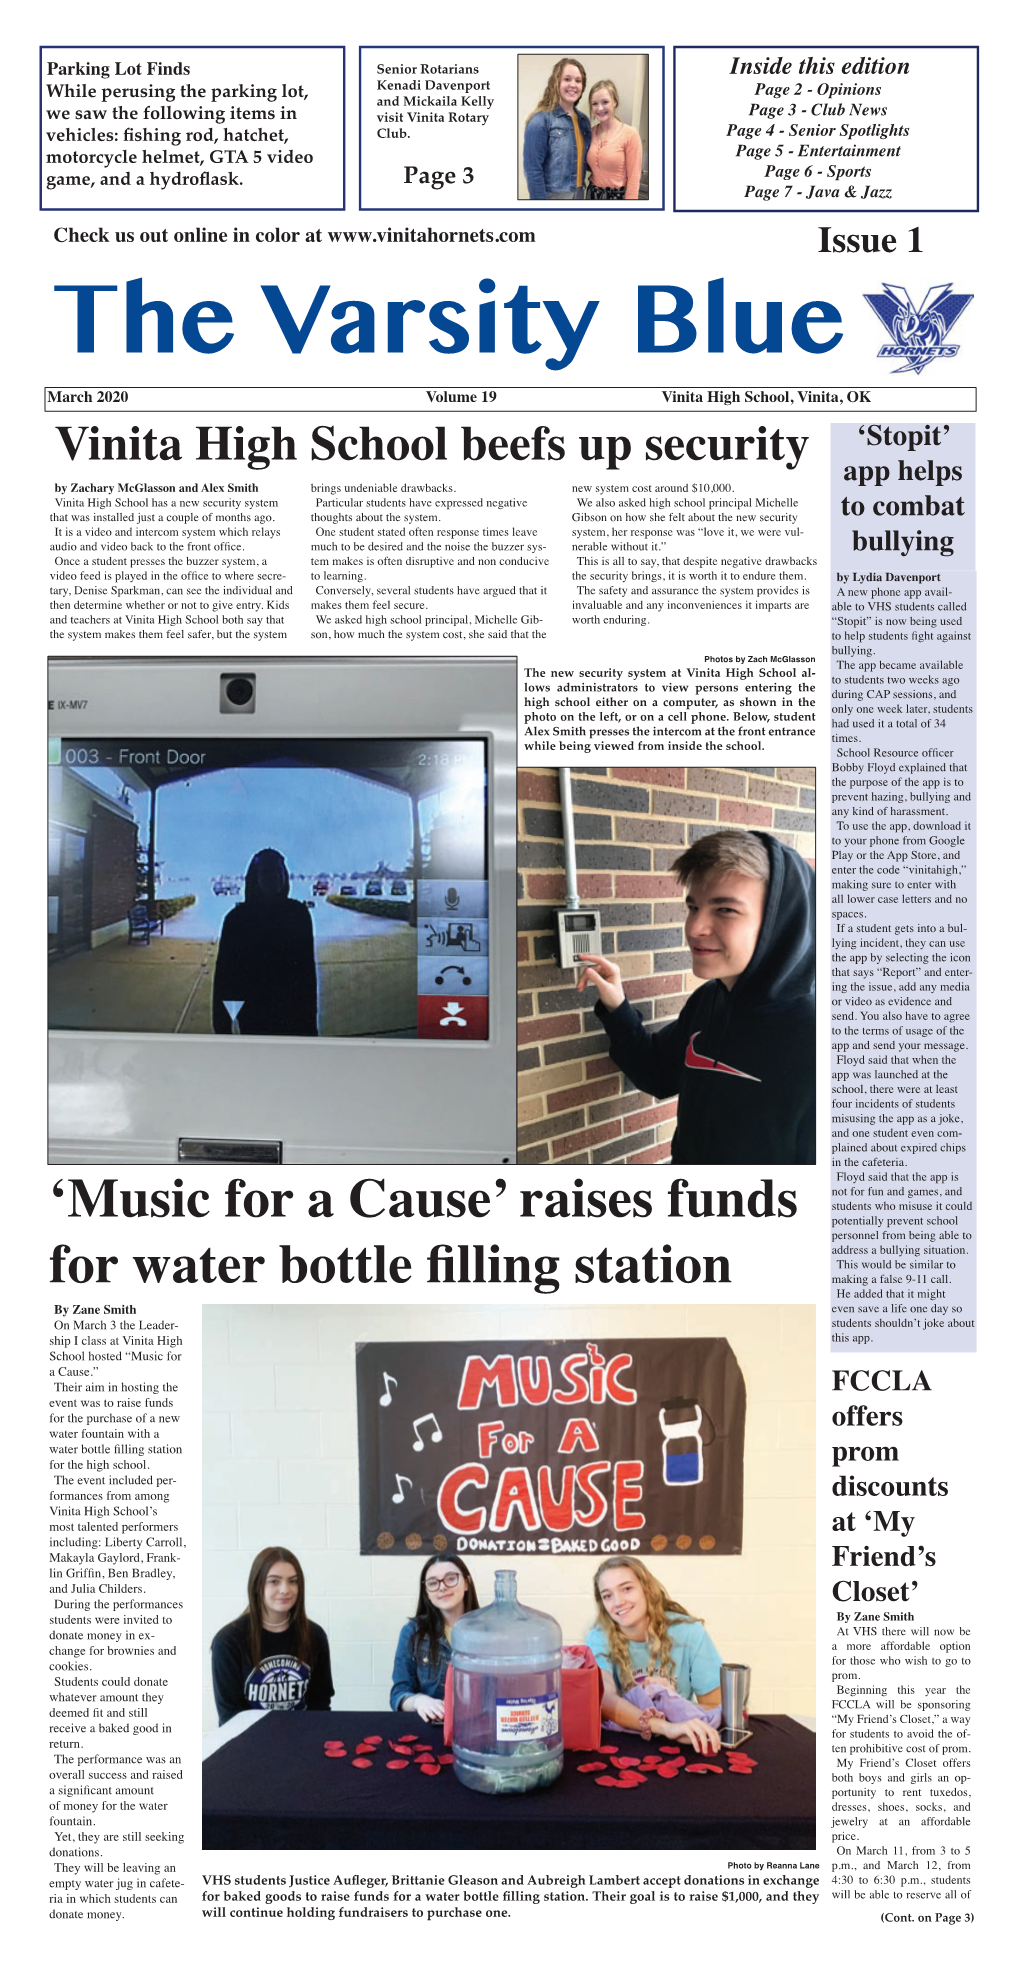 'Music for a Cause' Raises Funds for Water Bottle Filling Station